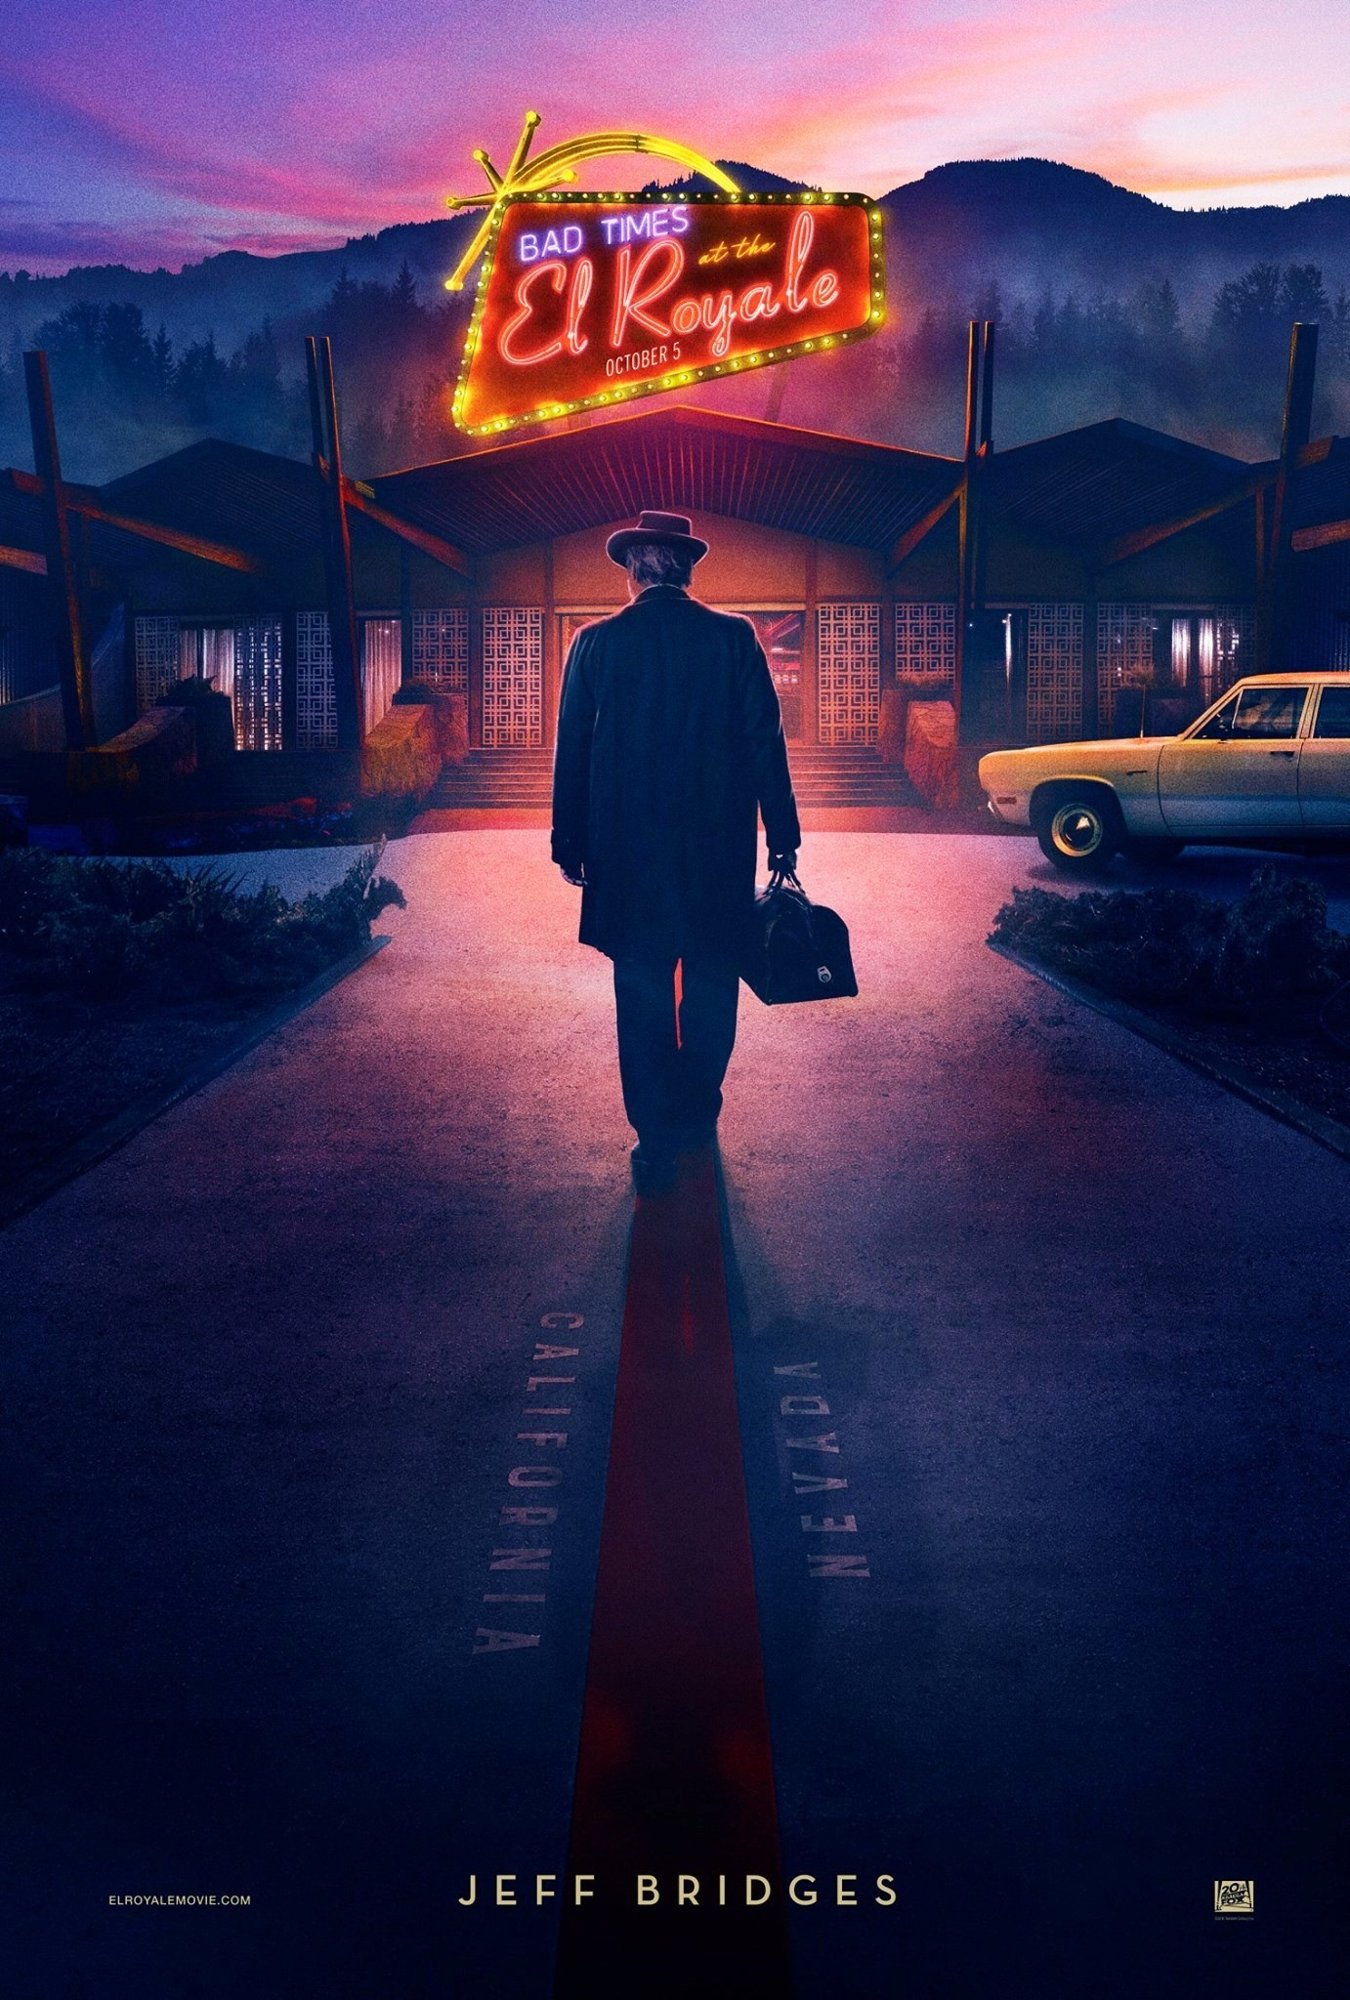 Bad Times at the El Royale (2018) Pictures, Trailer, Reviews, News, DVD ...